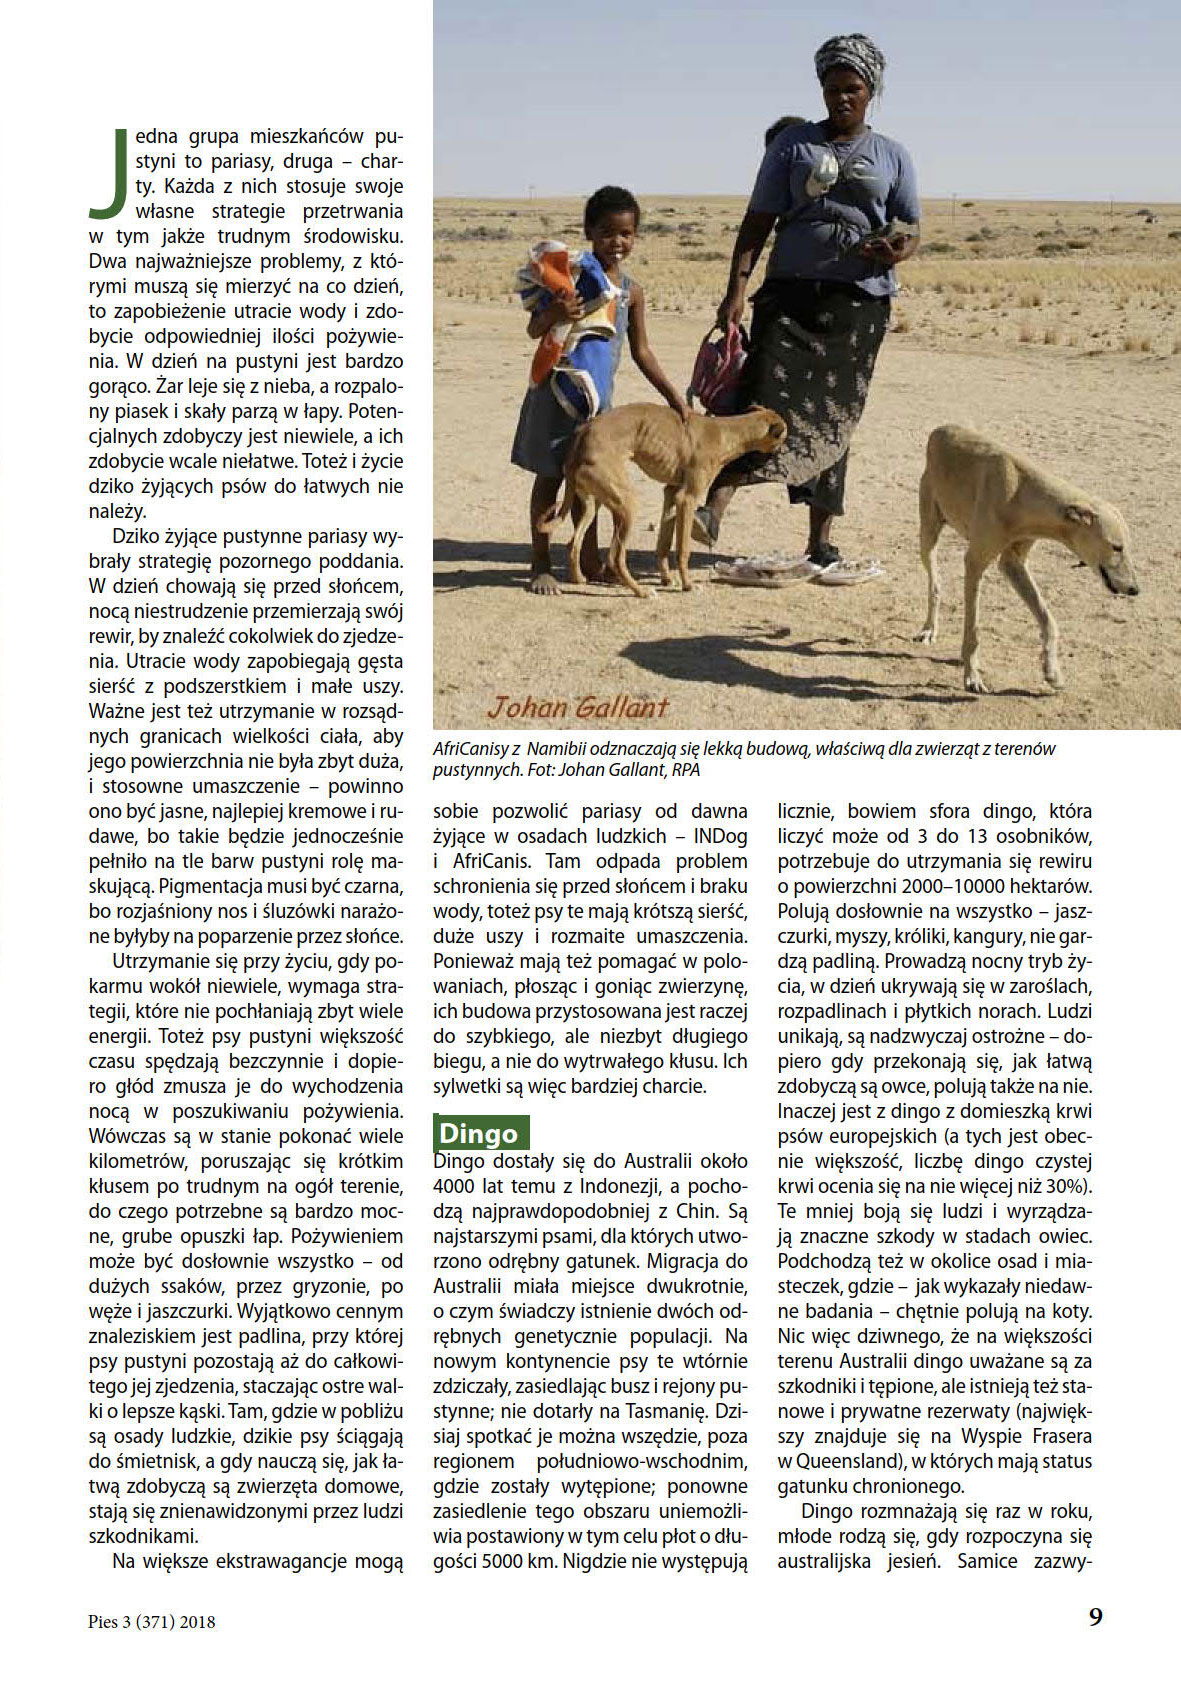 Article on primitive dogs, Polish Kennel Club magazine, August 2018